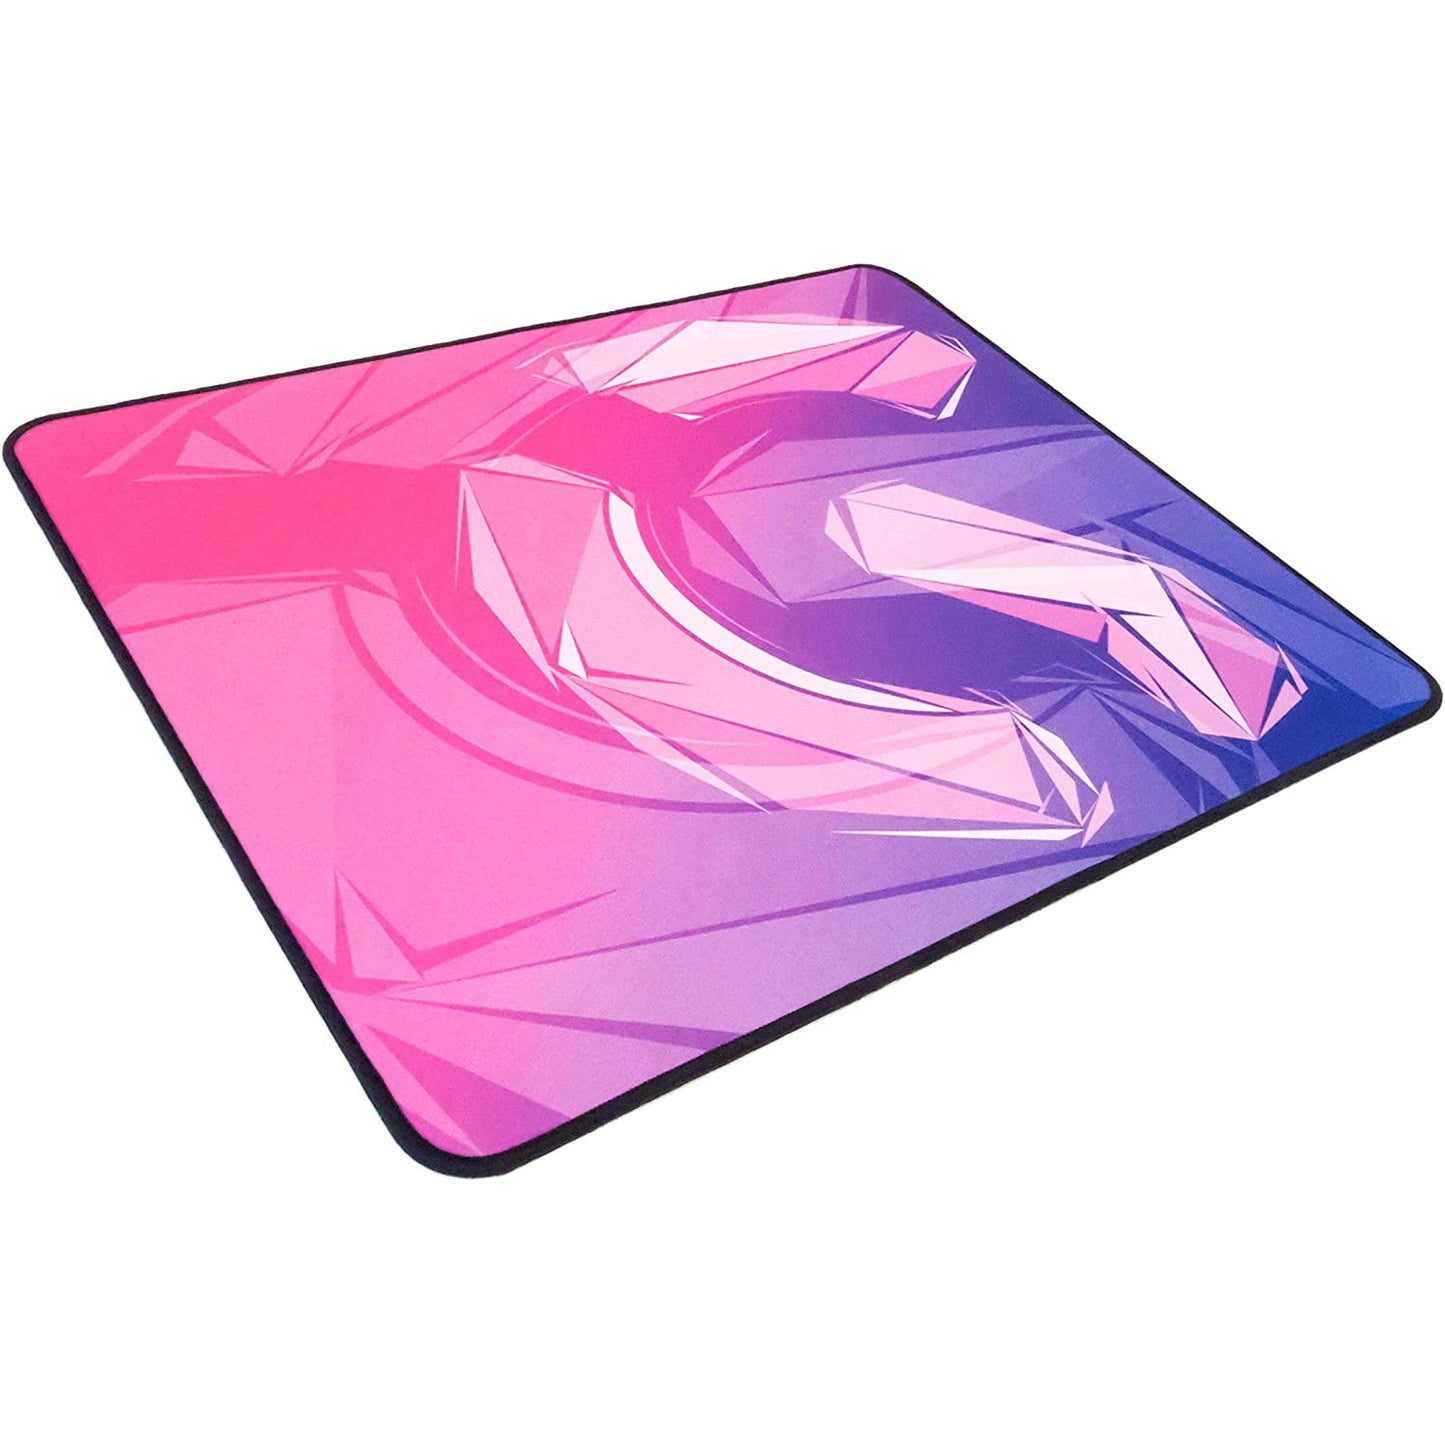 Neon Gaming Mouse Pad – Size 29 X 24 CM